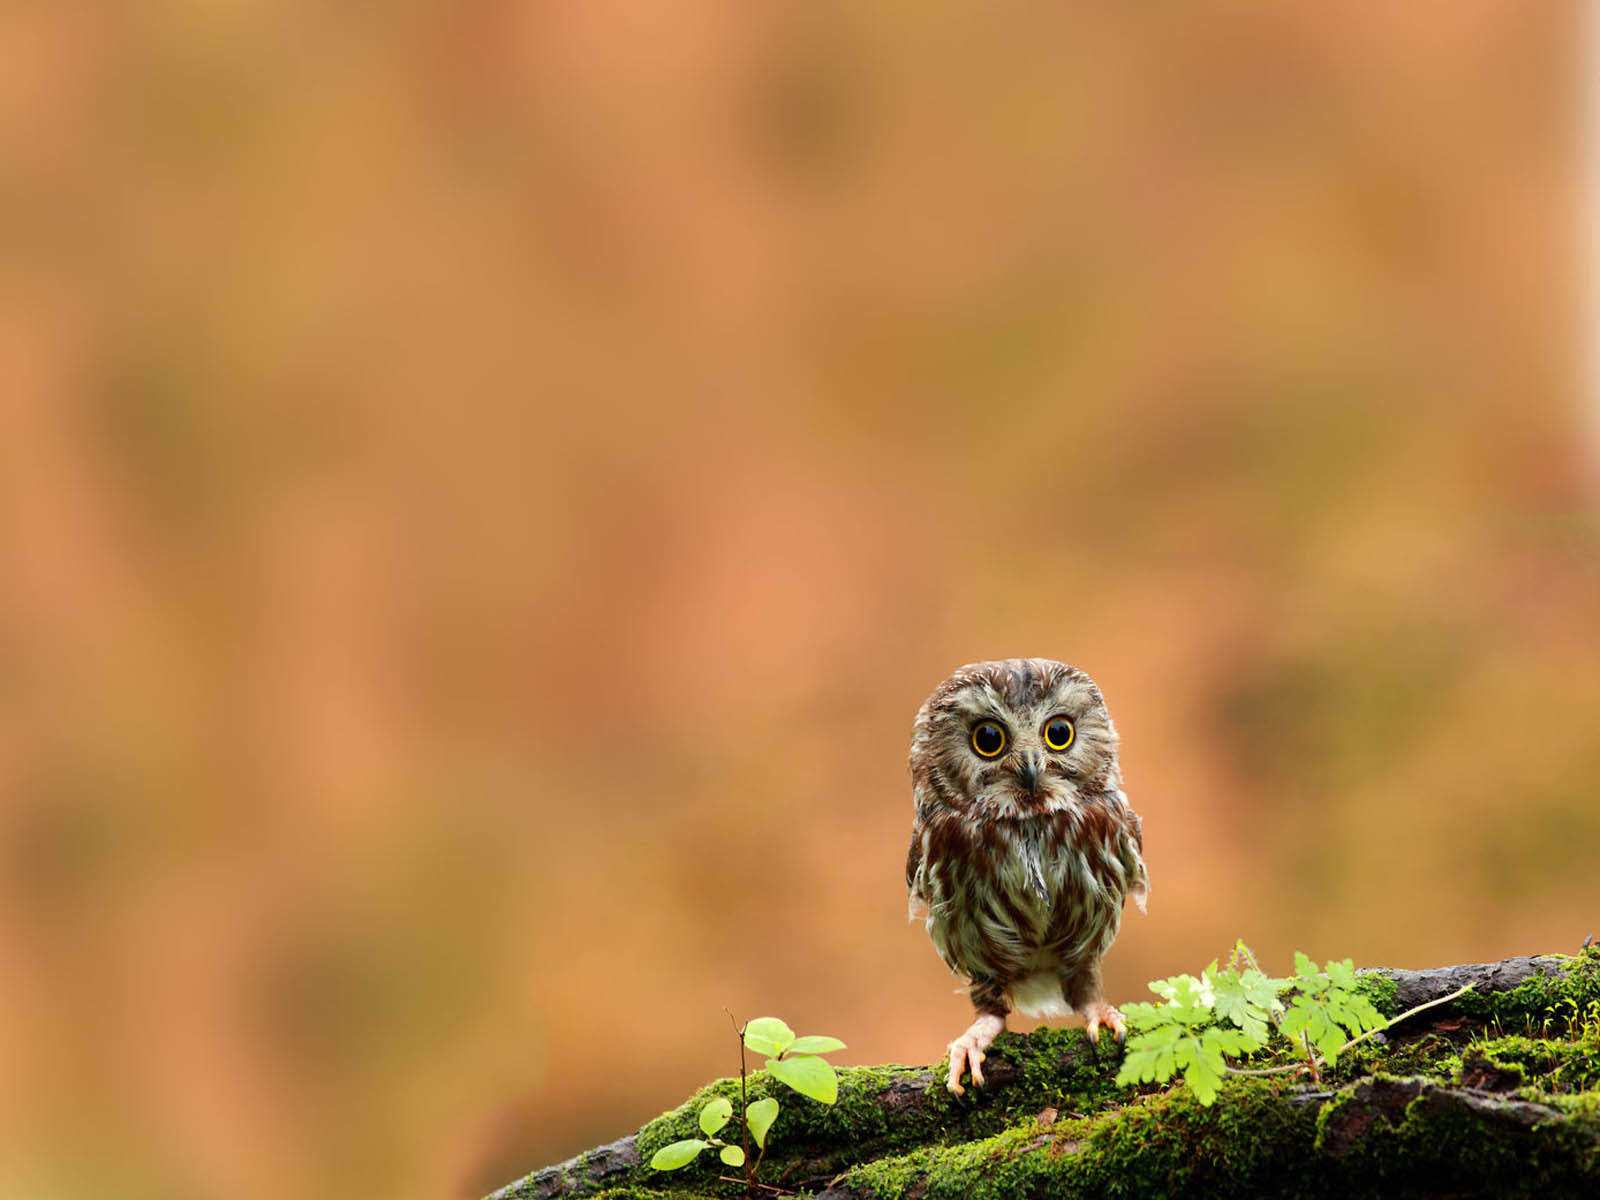 Funny Owl Wallpaper Image Photos Pictures And Background For